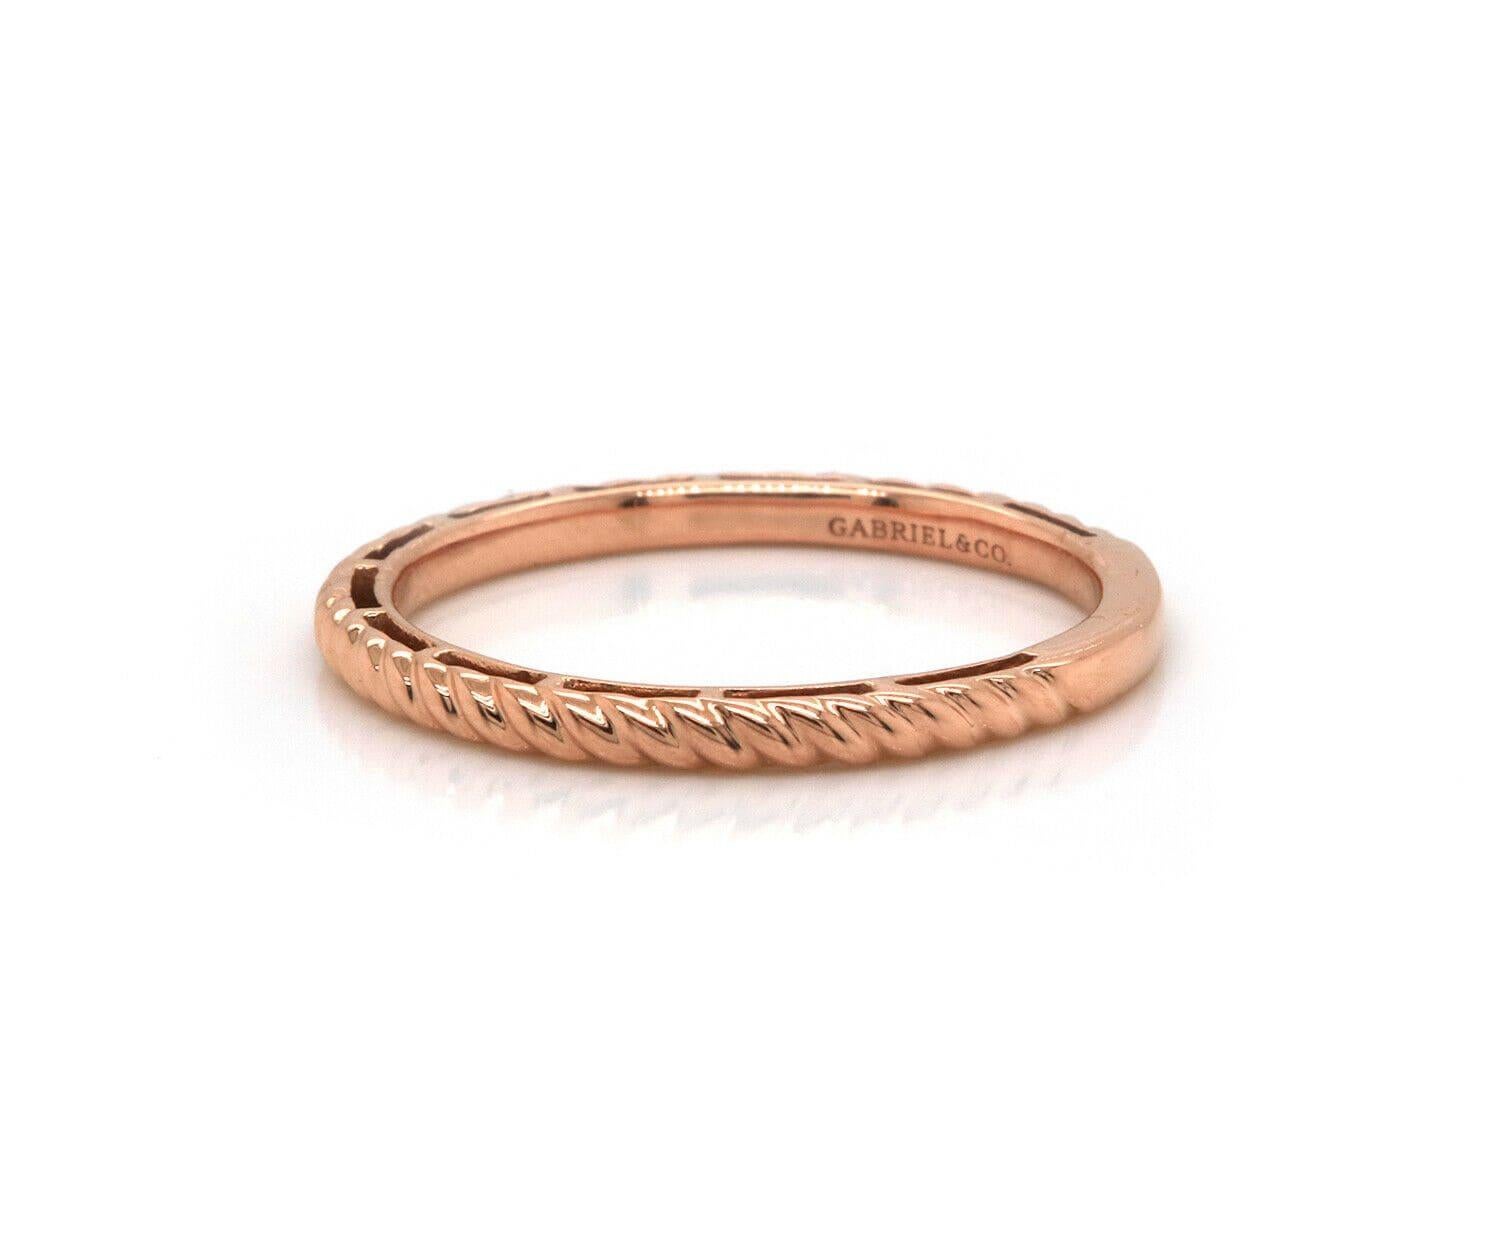 New Gabriel & Co. Twisted Rope Stackable Band Ring in 14K

Gabriel & Co. Twisted Rope Stackable Band Ring
14K Rose Gold
Band Width: Approx. 2.00 MM
Ring Size: 6.25 (US)
Weight: Approx. 1.71 Grams
Stamped: Gabriel & Co., 14K,